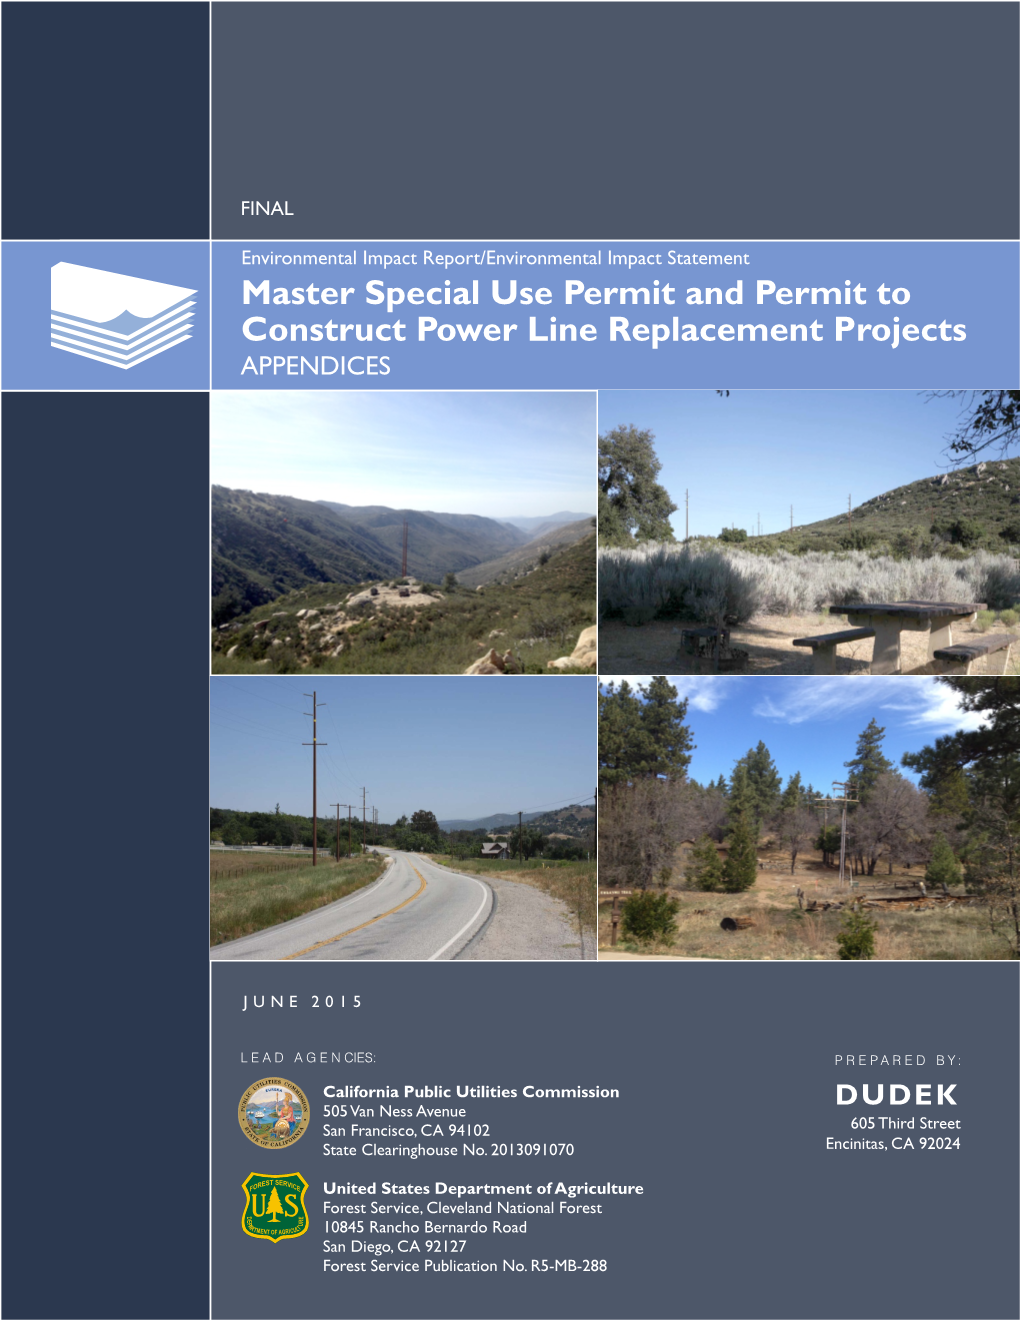 Master Special Use Permit and Permit to Construct Powerline Replacement Projects, Final Environmental Impact Report/Environmenta